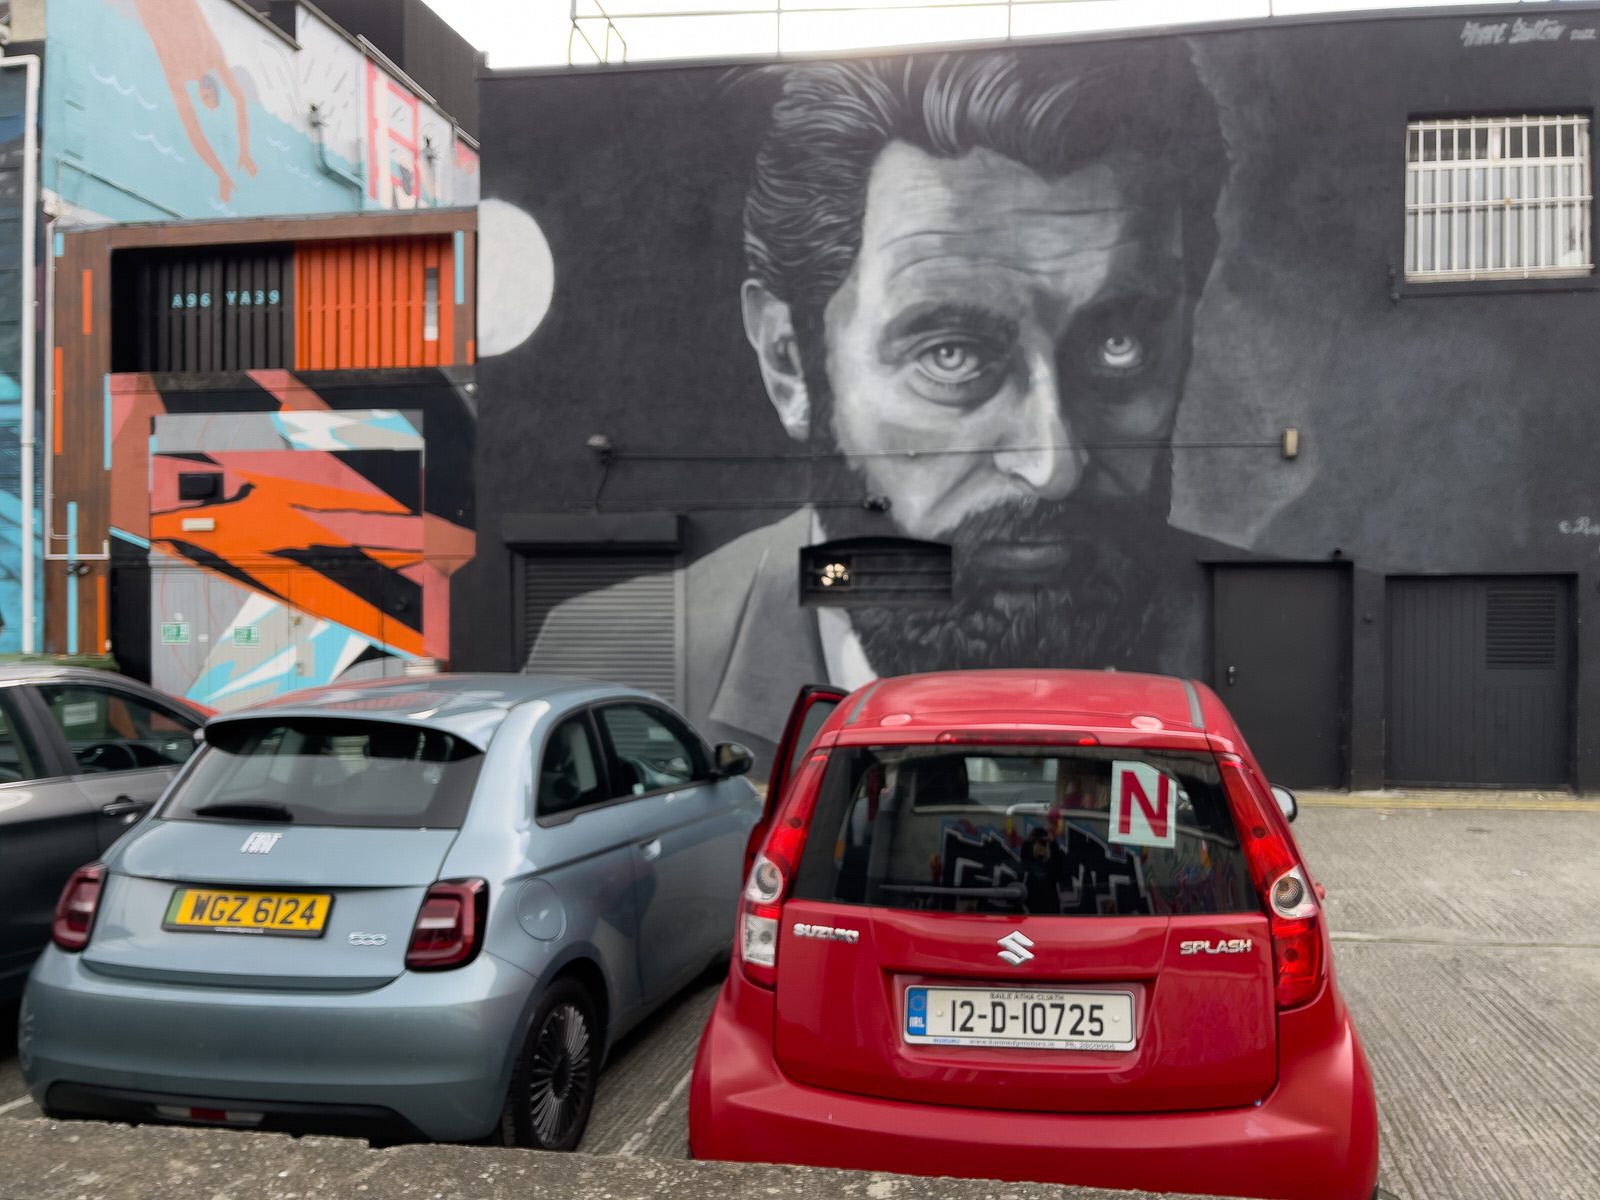 MURALS IN DUN LAOGHAIRE [SECOND SELECTION OF RANDOM IMAGES - ANSEO STREET ART PROJECT] 001